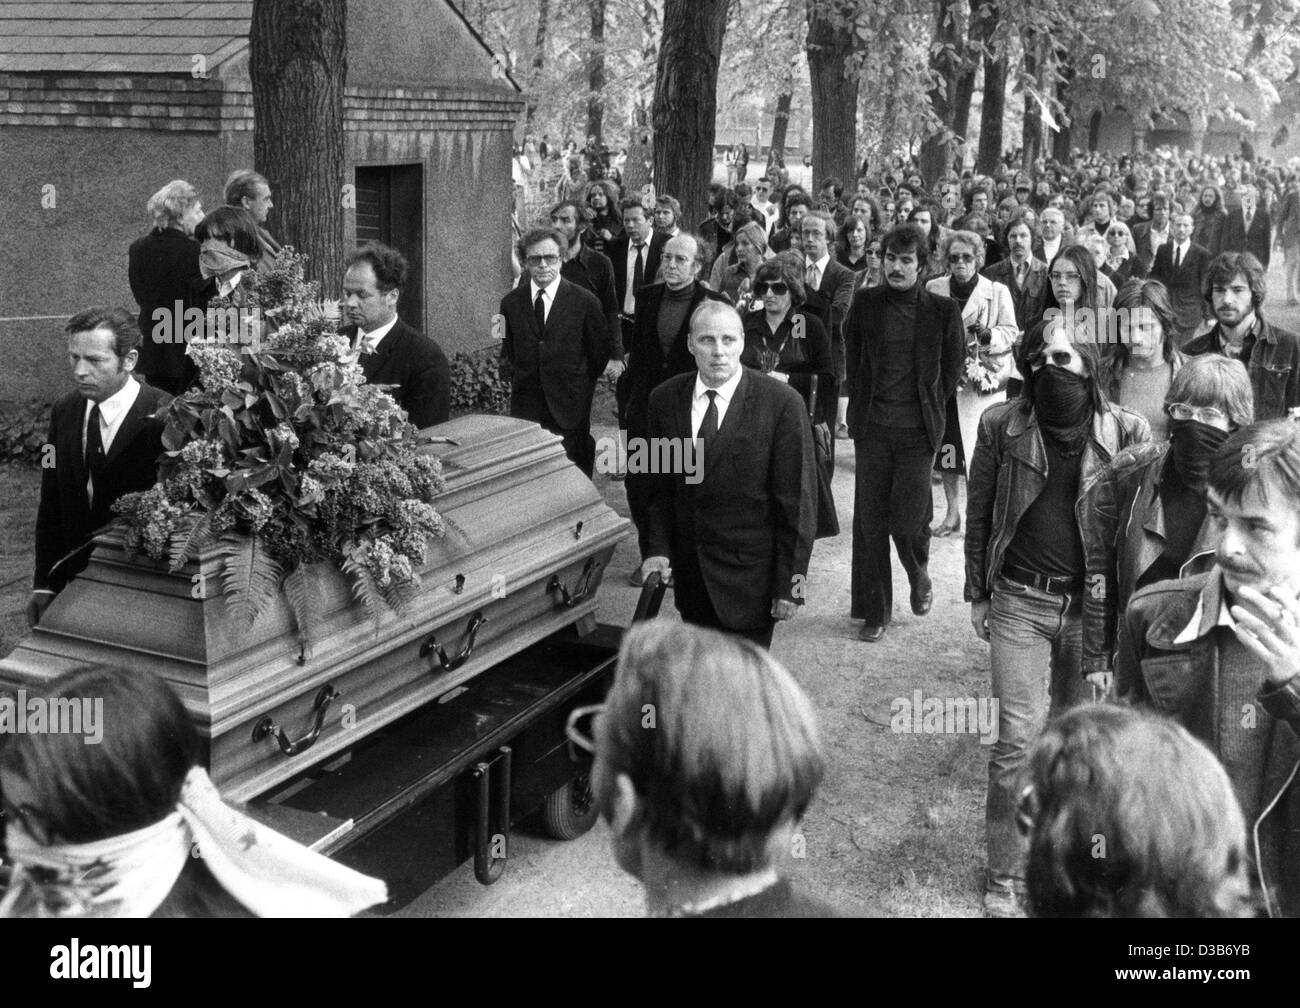 (dpa files) - Three thousand people and relatives and lawyers follow the lilac-covered coffin of Ulrike Meinhof, a journalist and terrorist of the terrorist group RAF, during the funeral procession to her grave at the Dreifaltigkeit Cemetery in Berlin, 15 May 1977. Behind the coffin (the first row f Stock Photo